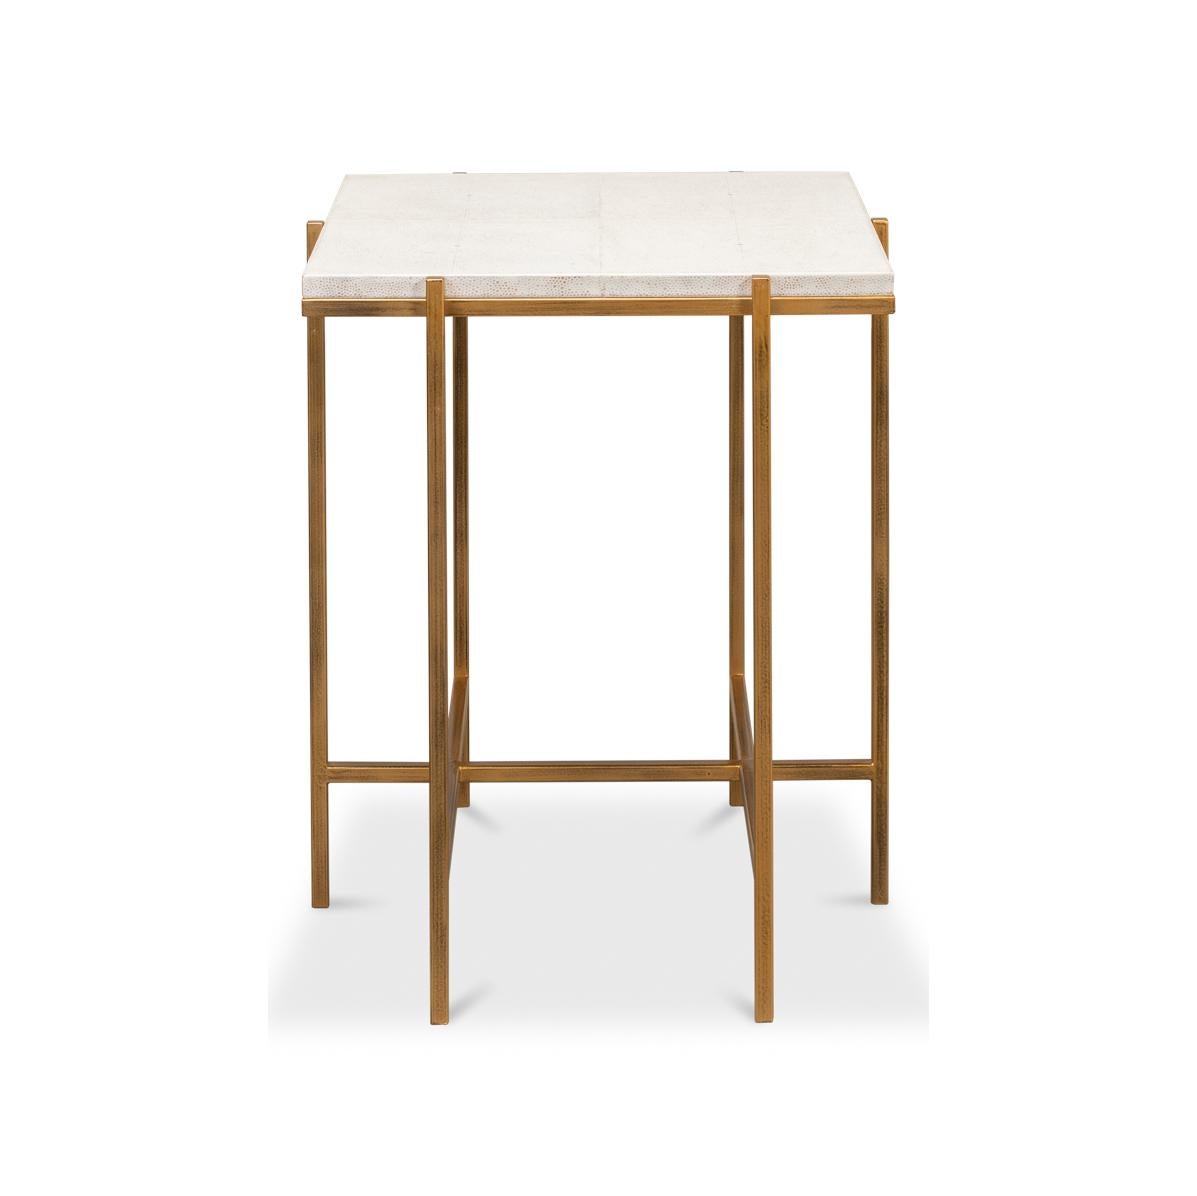 Designed to infuse an air of elegance into any space, this table features an embossed leather top in our Osprey white finish. The square top sits on a geometric, gold-tone iron cube frame that not only adds a contemporary flair but ensures stability